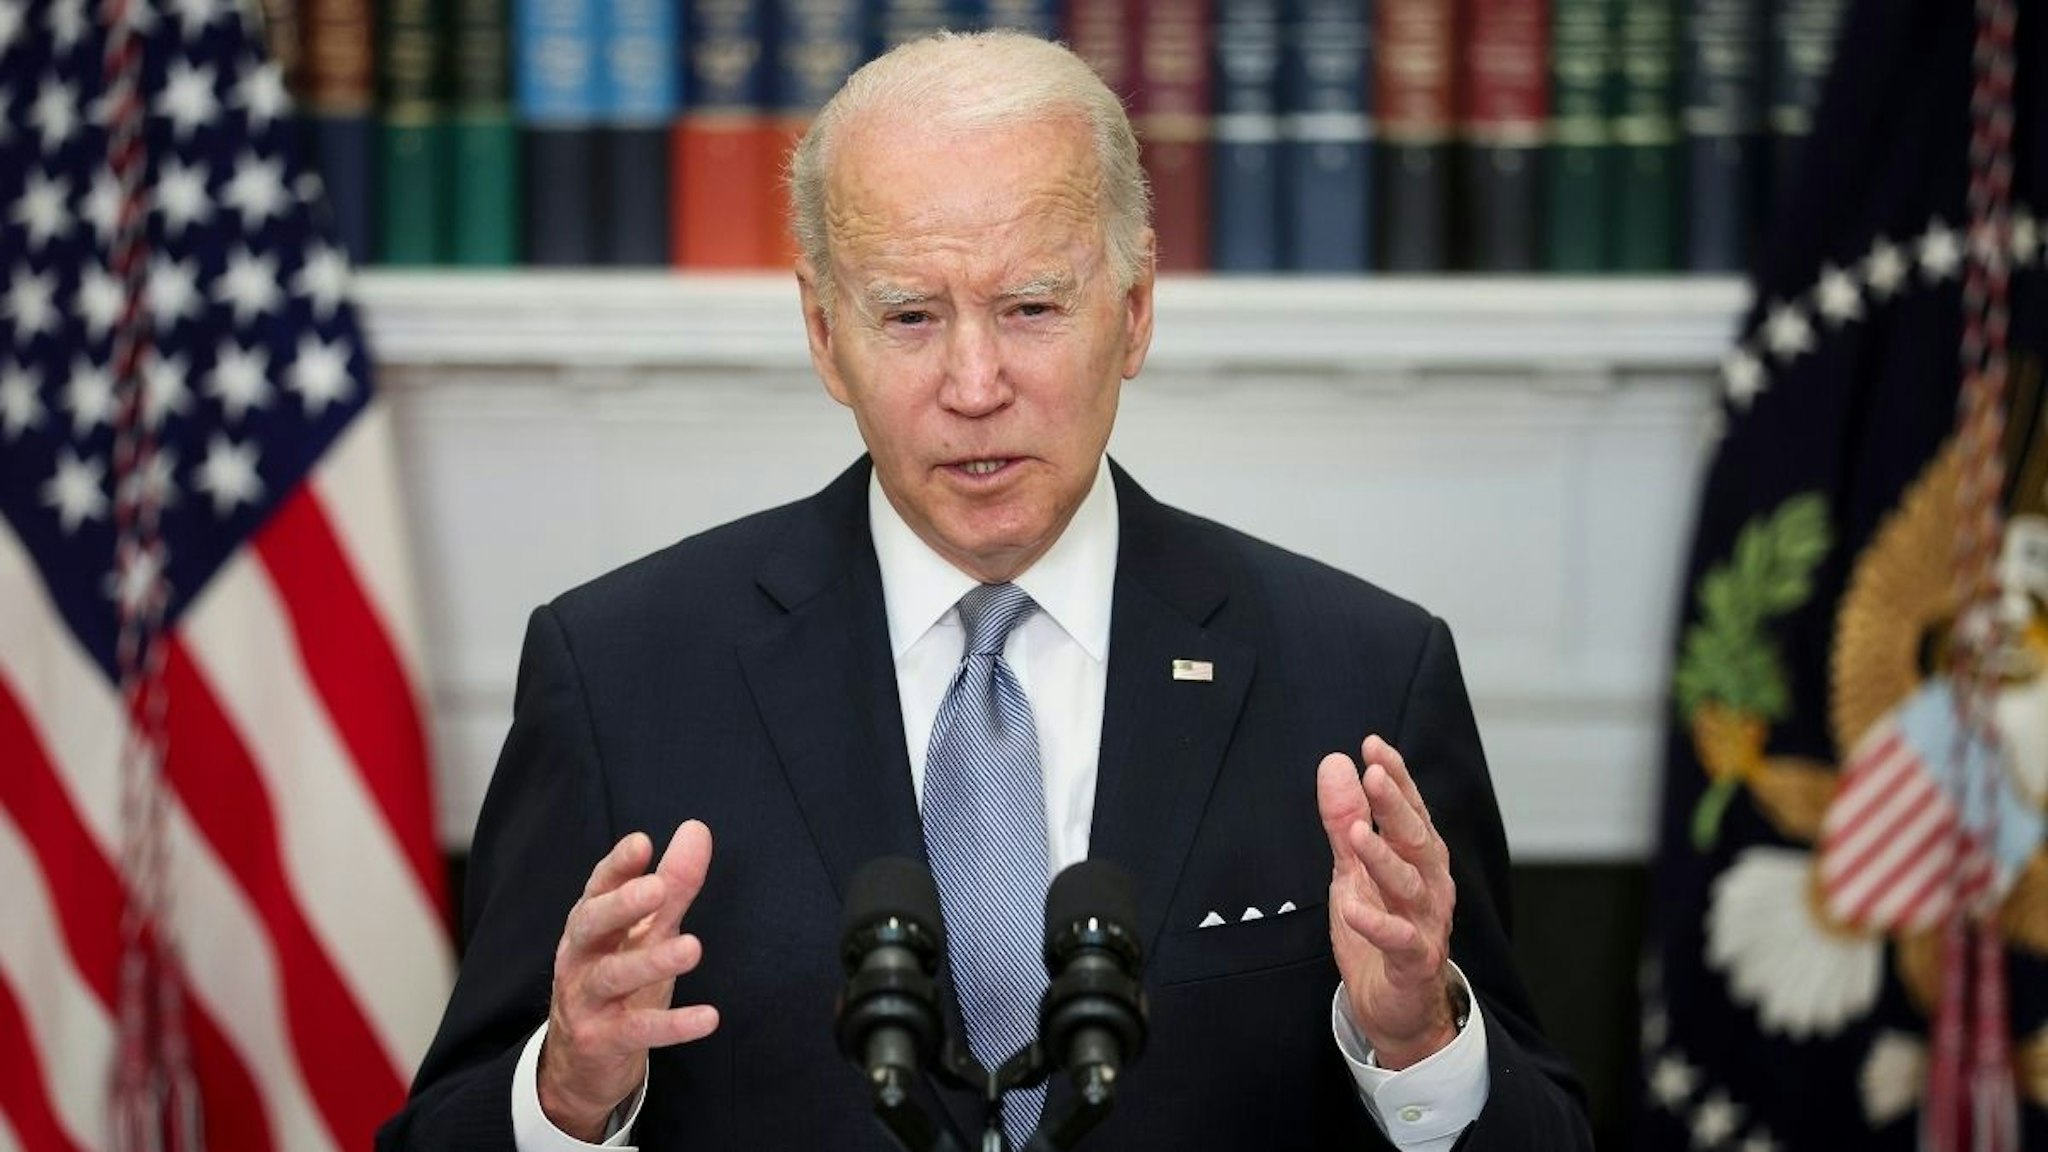 U.S. President Joe Biden delivers remarks on Russia and Ukraine from the Roosevelt Room of the White House on April 21, 2022 in Washington, DC. Biden announced an additional $800 million in military aid to Ukraine, including heavy artillery, drones and ammunition.